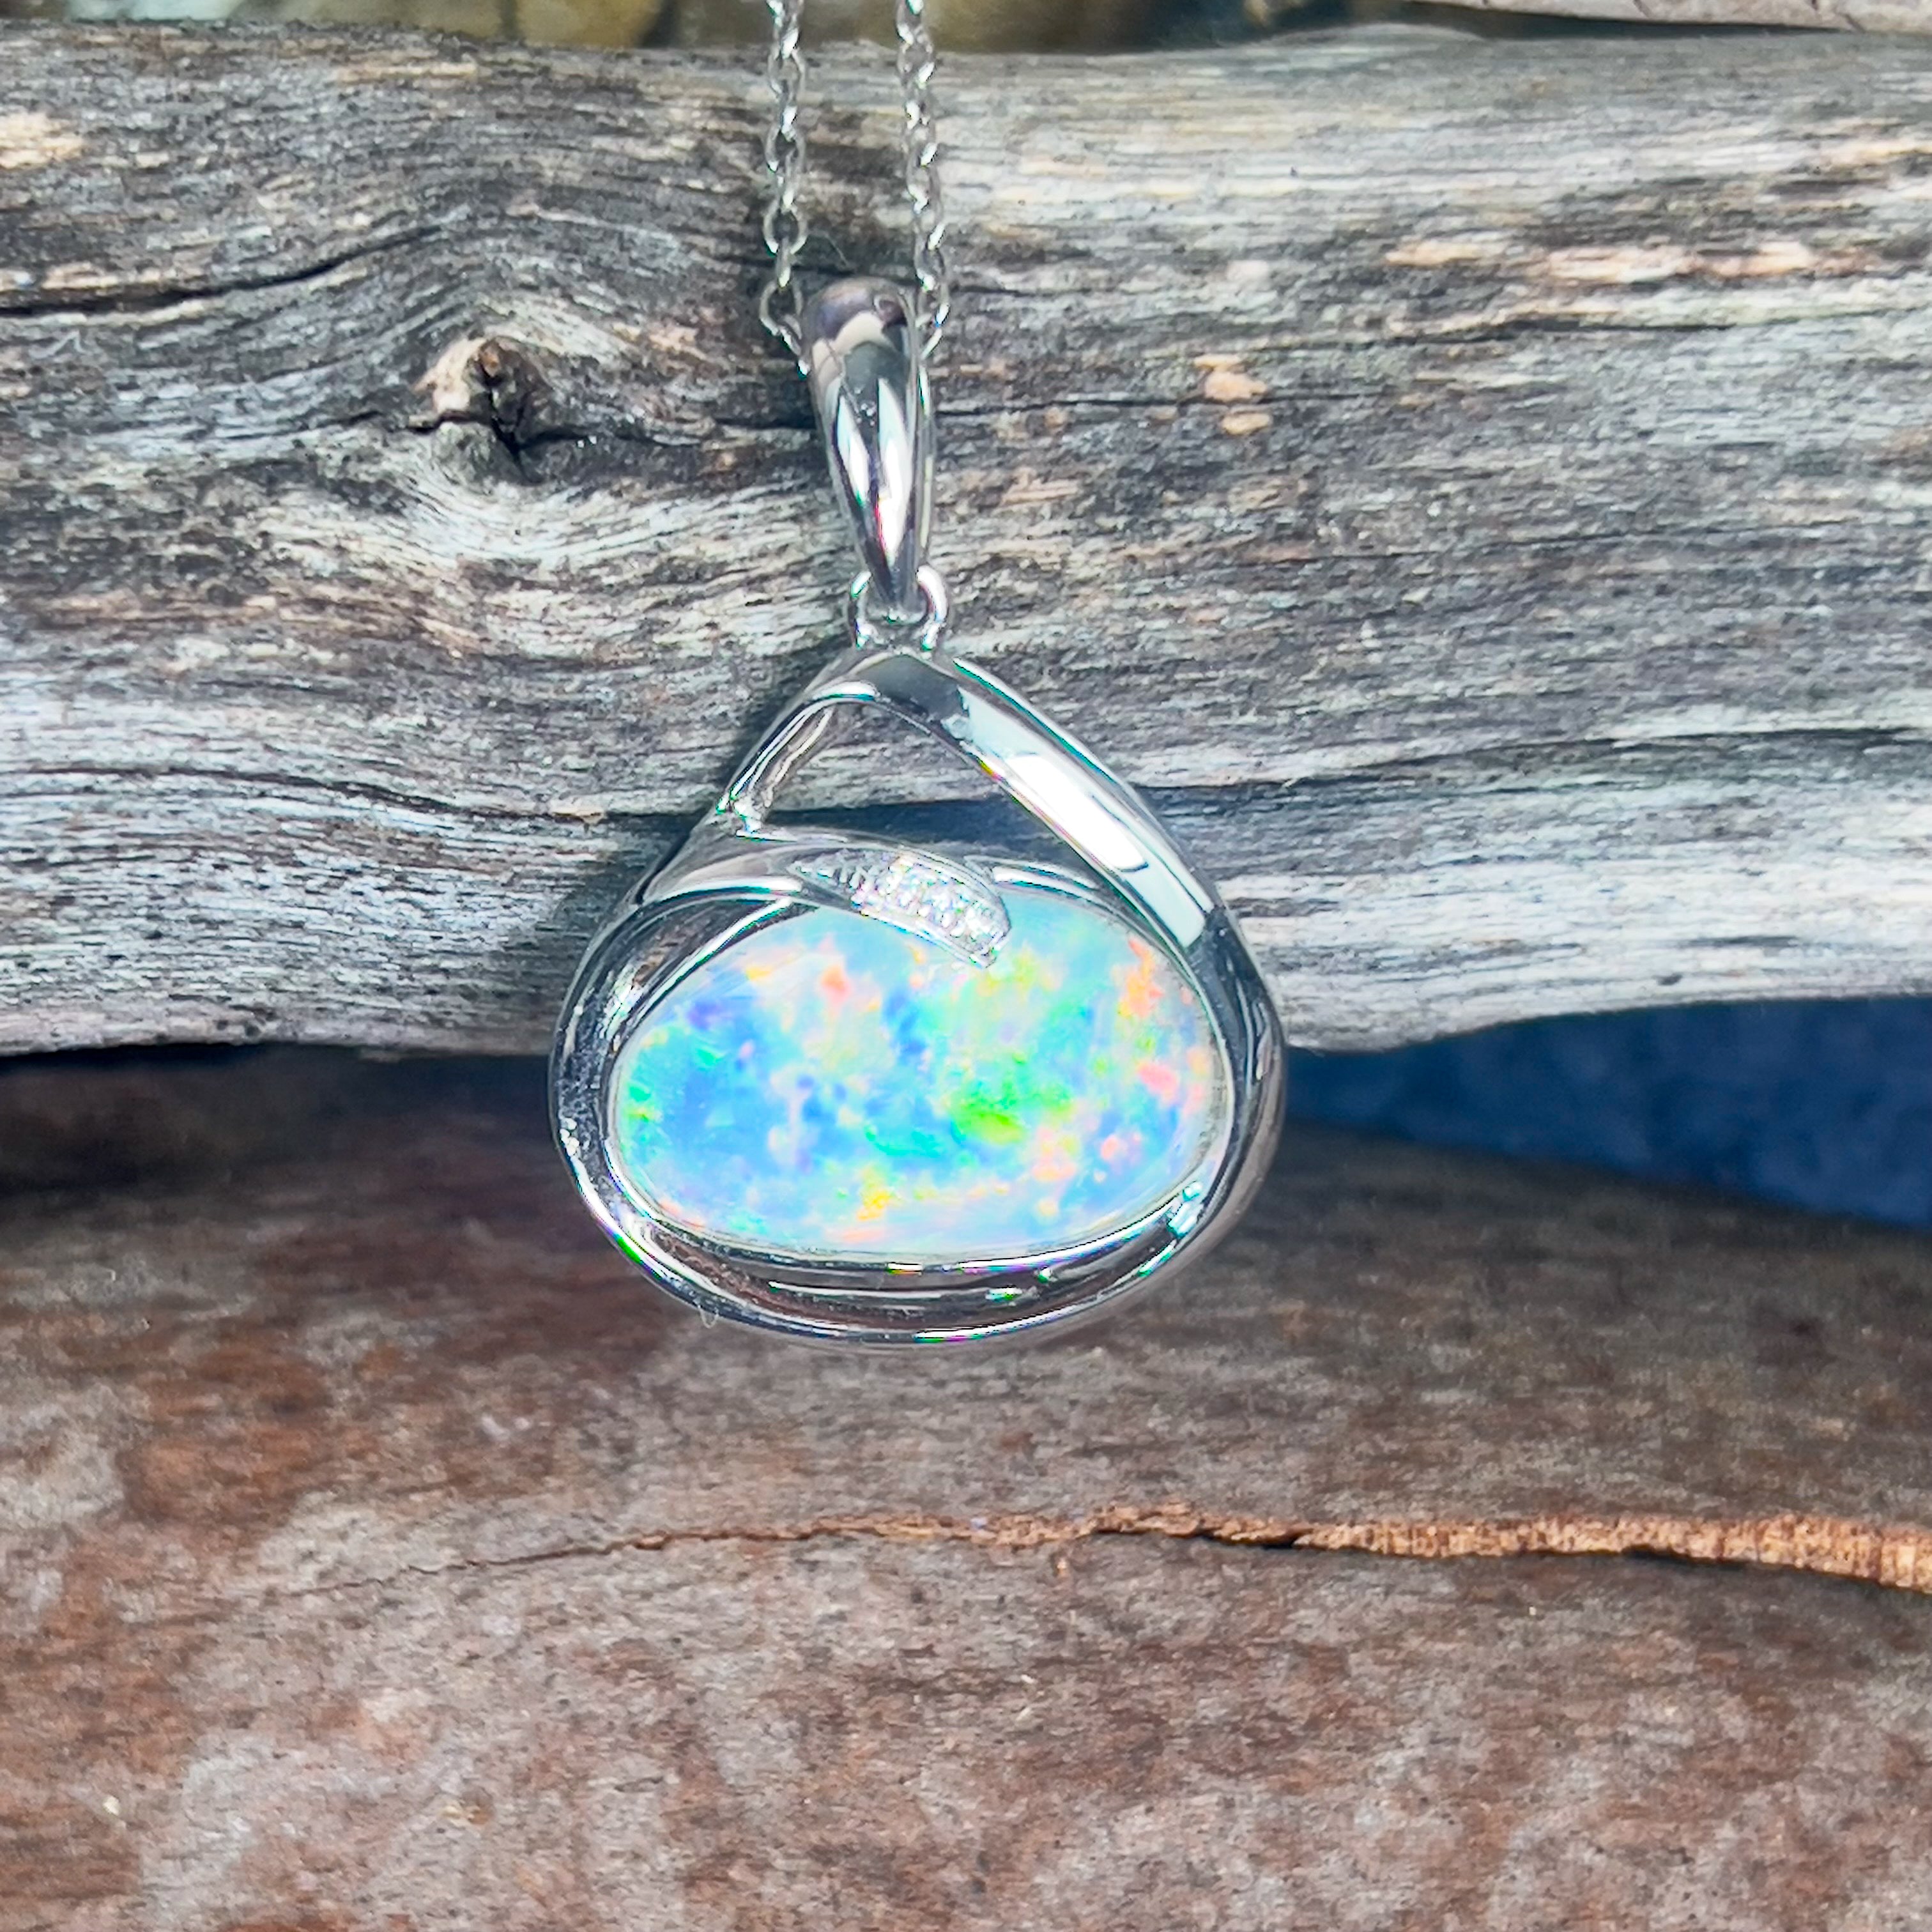 18kt White Gold pendant with one 2.3ct Crystal Opal - Masterpiece Jewellery Opal & Gems Sydney Australia | Online Shop